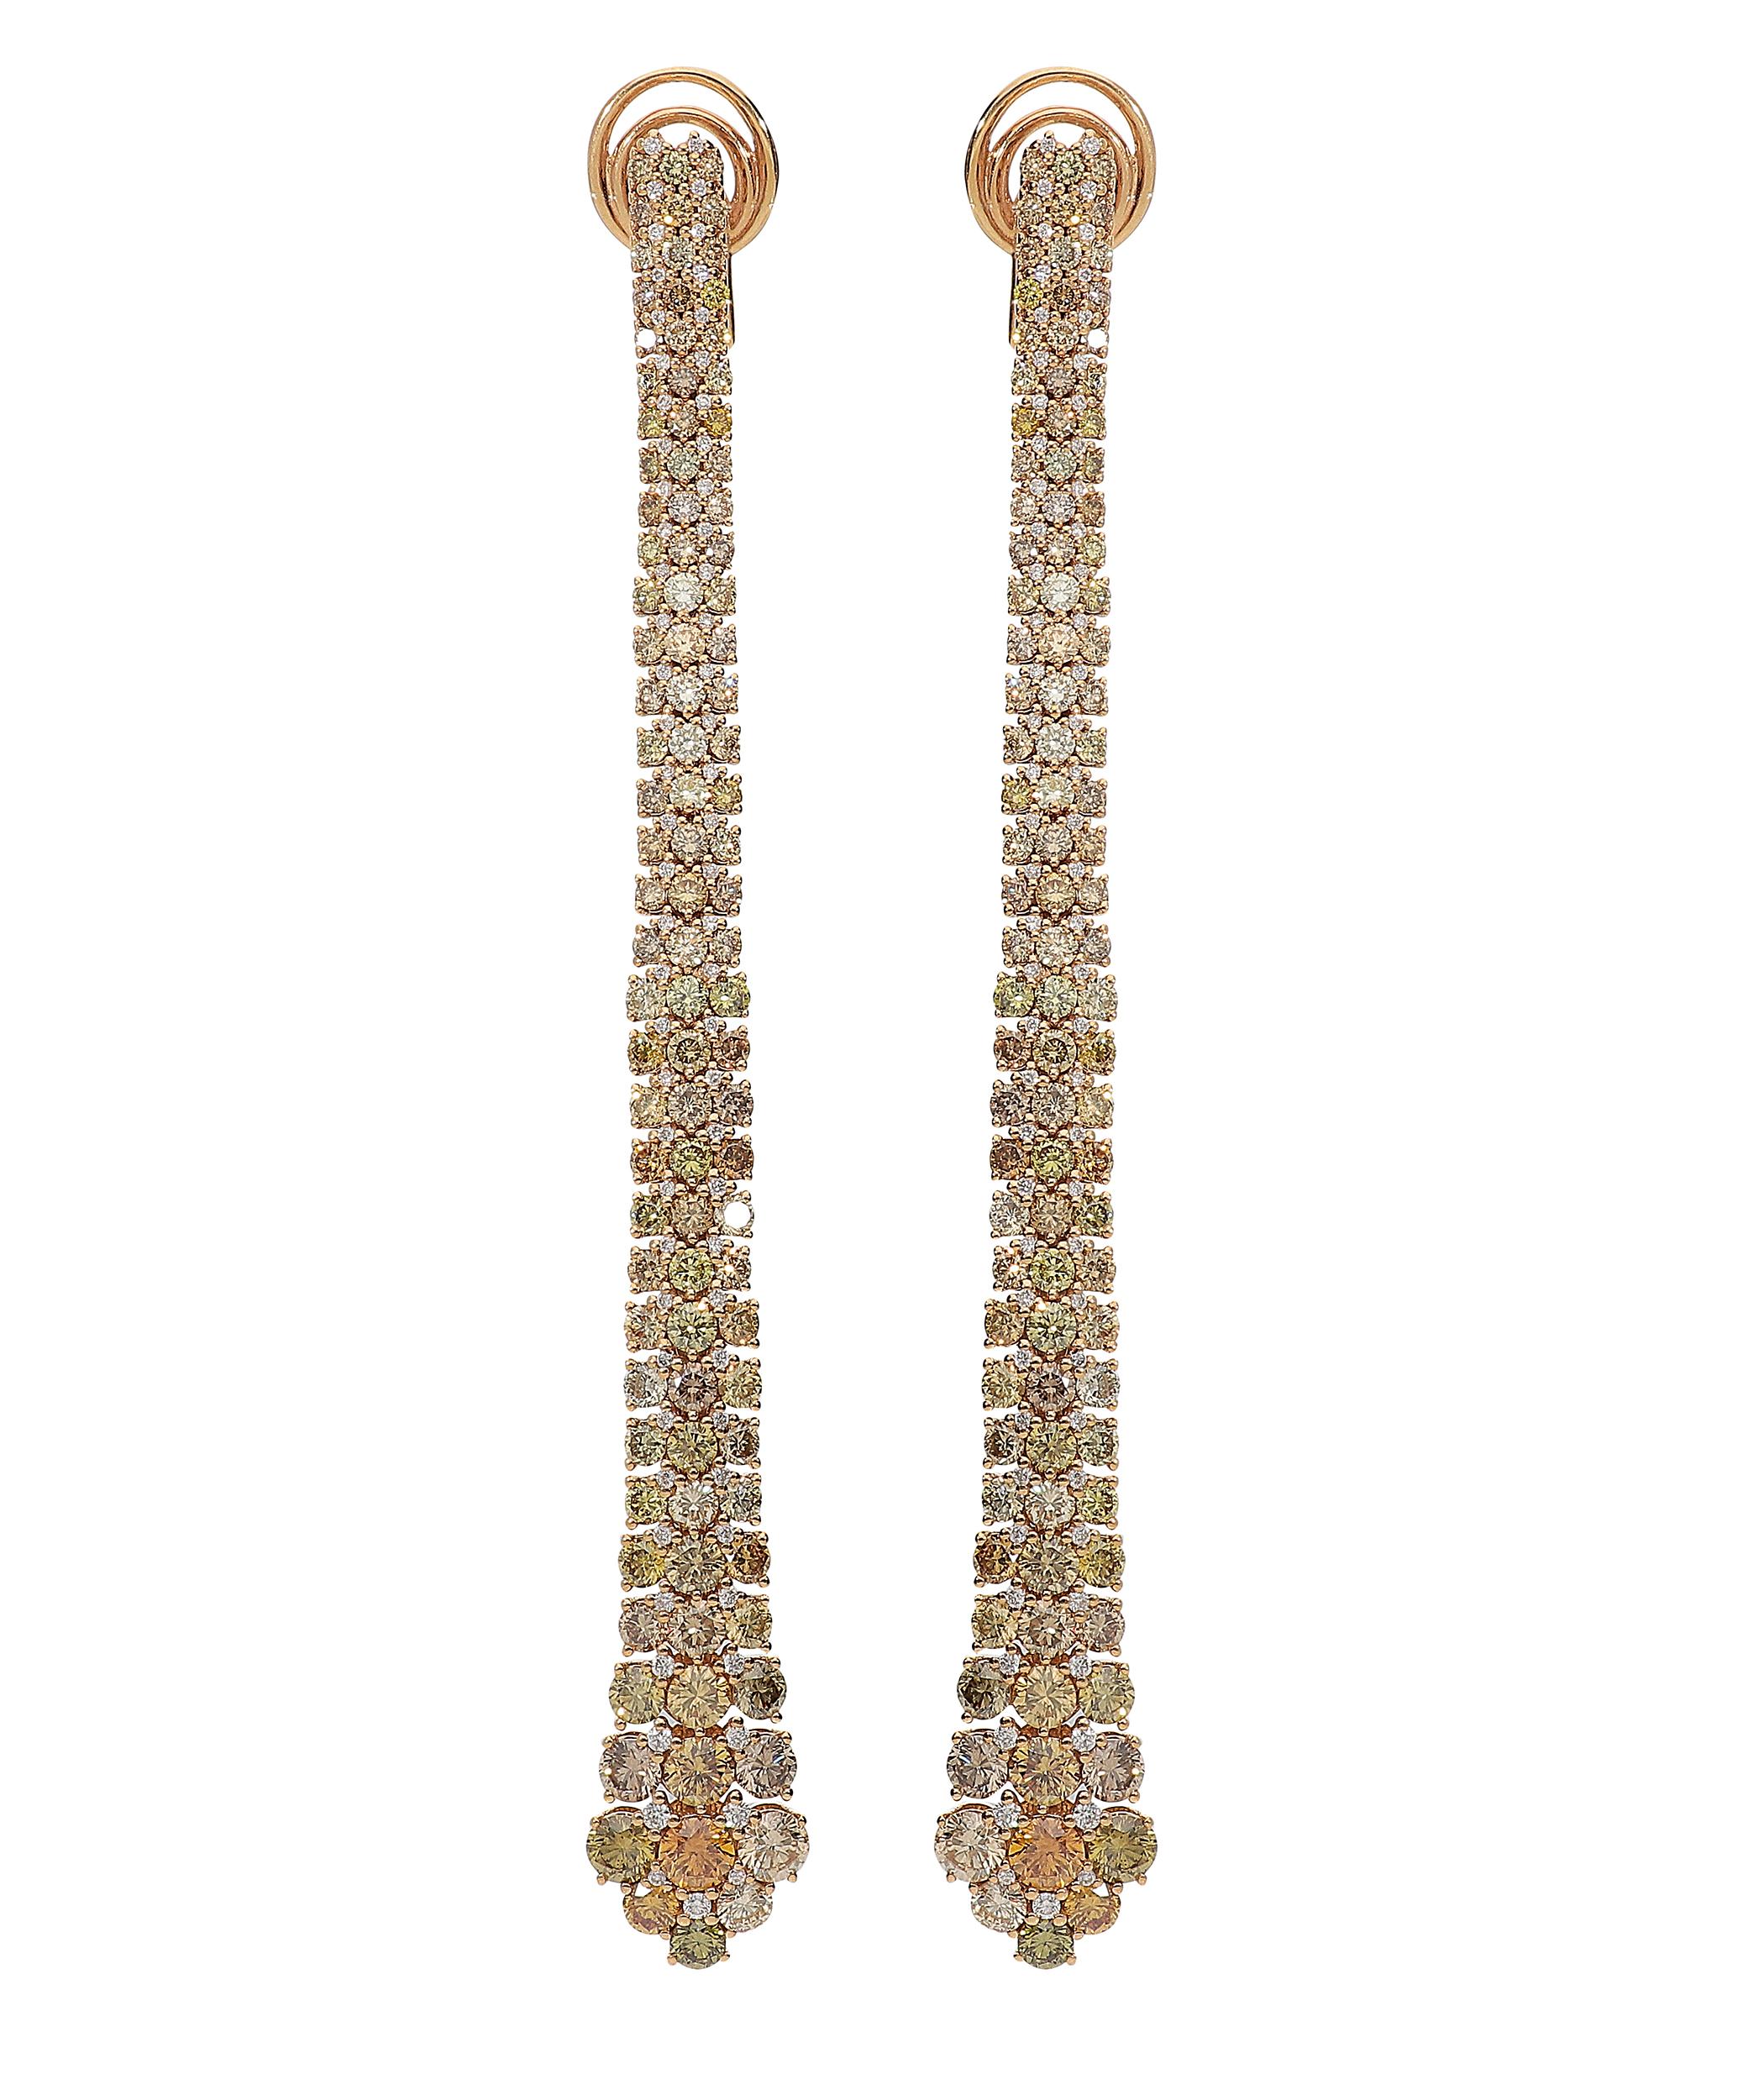 Stunning long dangle earrings in 18kt pink gold for 18,00 grams and a length of 9 centimeters.
Diamonds are 0,59 carat of white round brilliant color G clarity SI and 8.55 carats of multi colored round brilliant in a mix of nuances that catches the